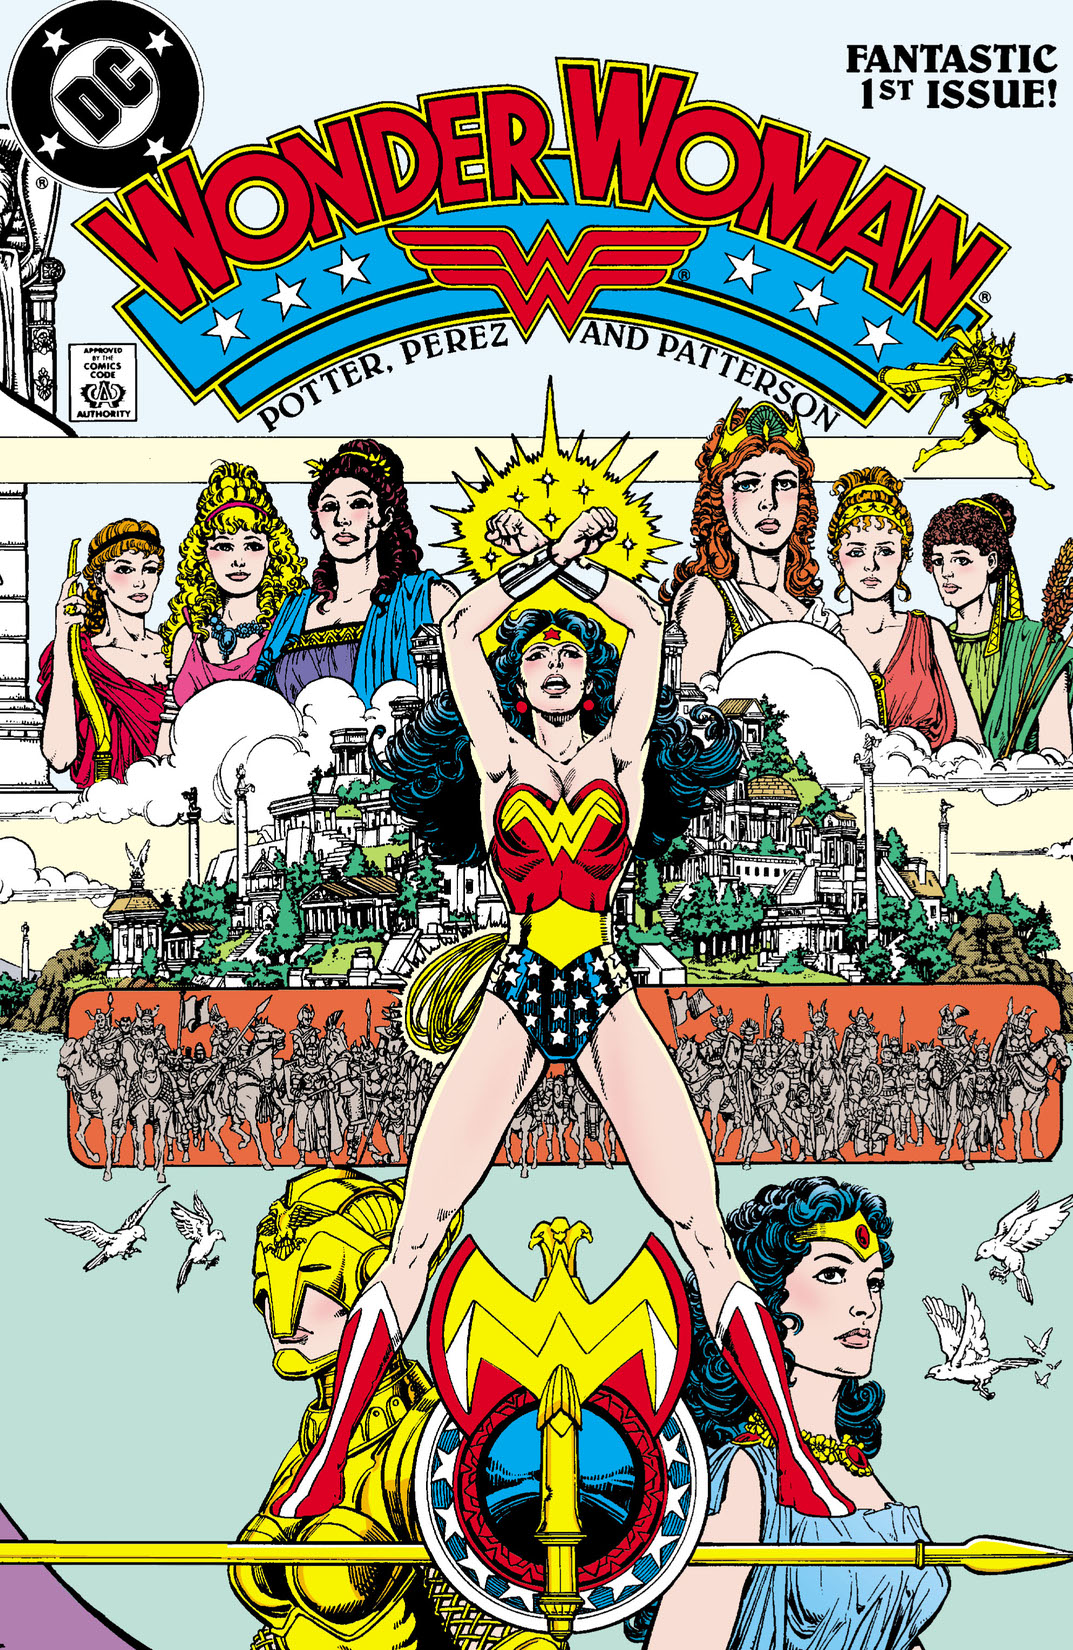 Wonder Woman (1986-) #1 preview images